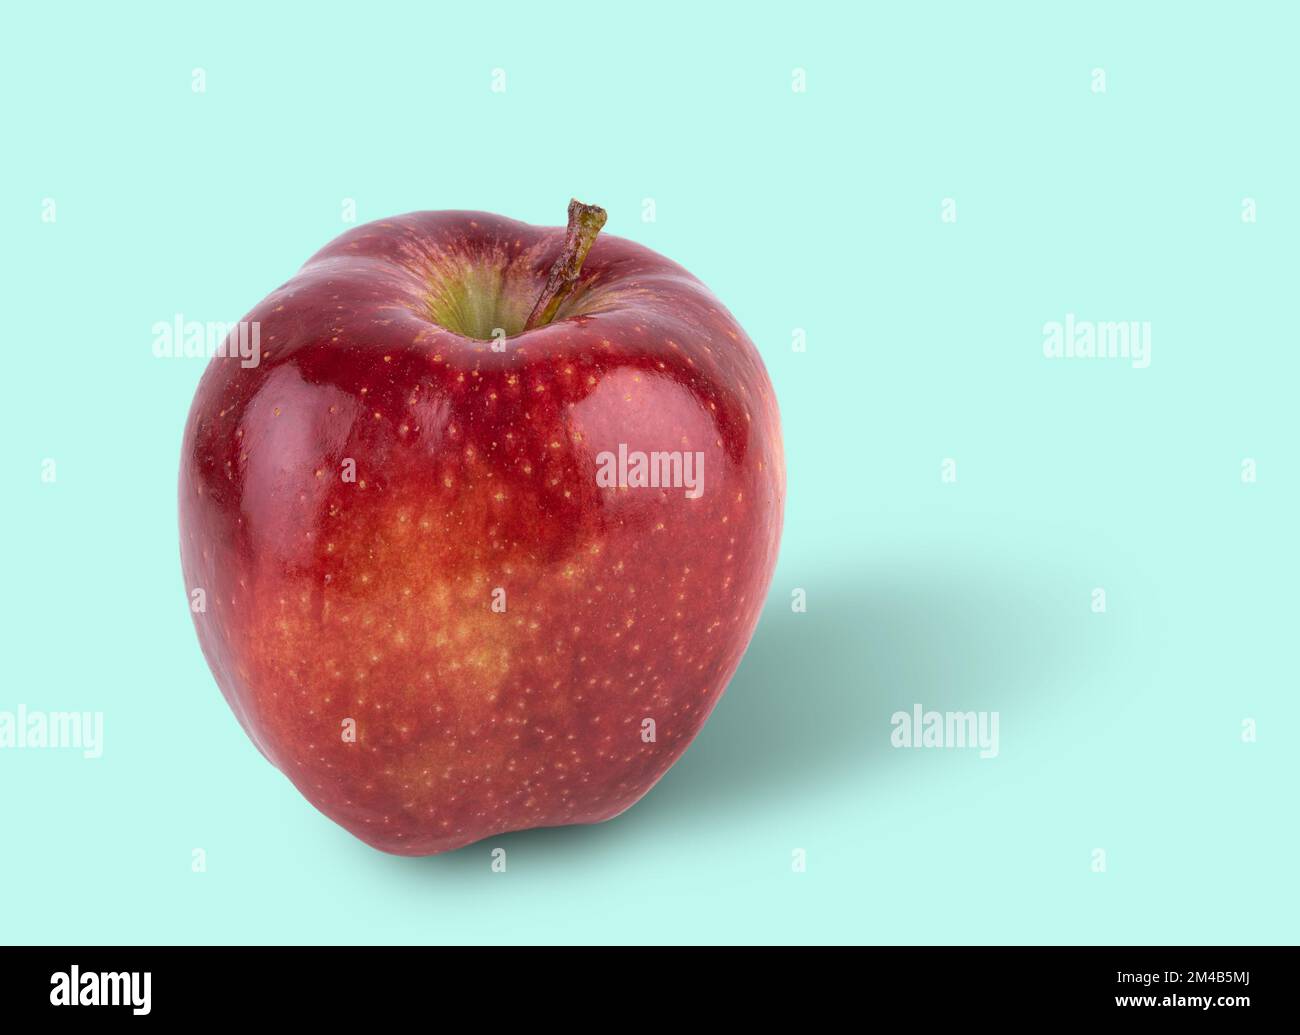 juicy red delicious apple on a light blue background. Front view and copy space. Stock Photo